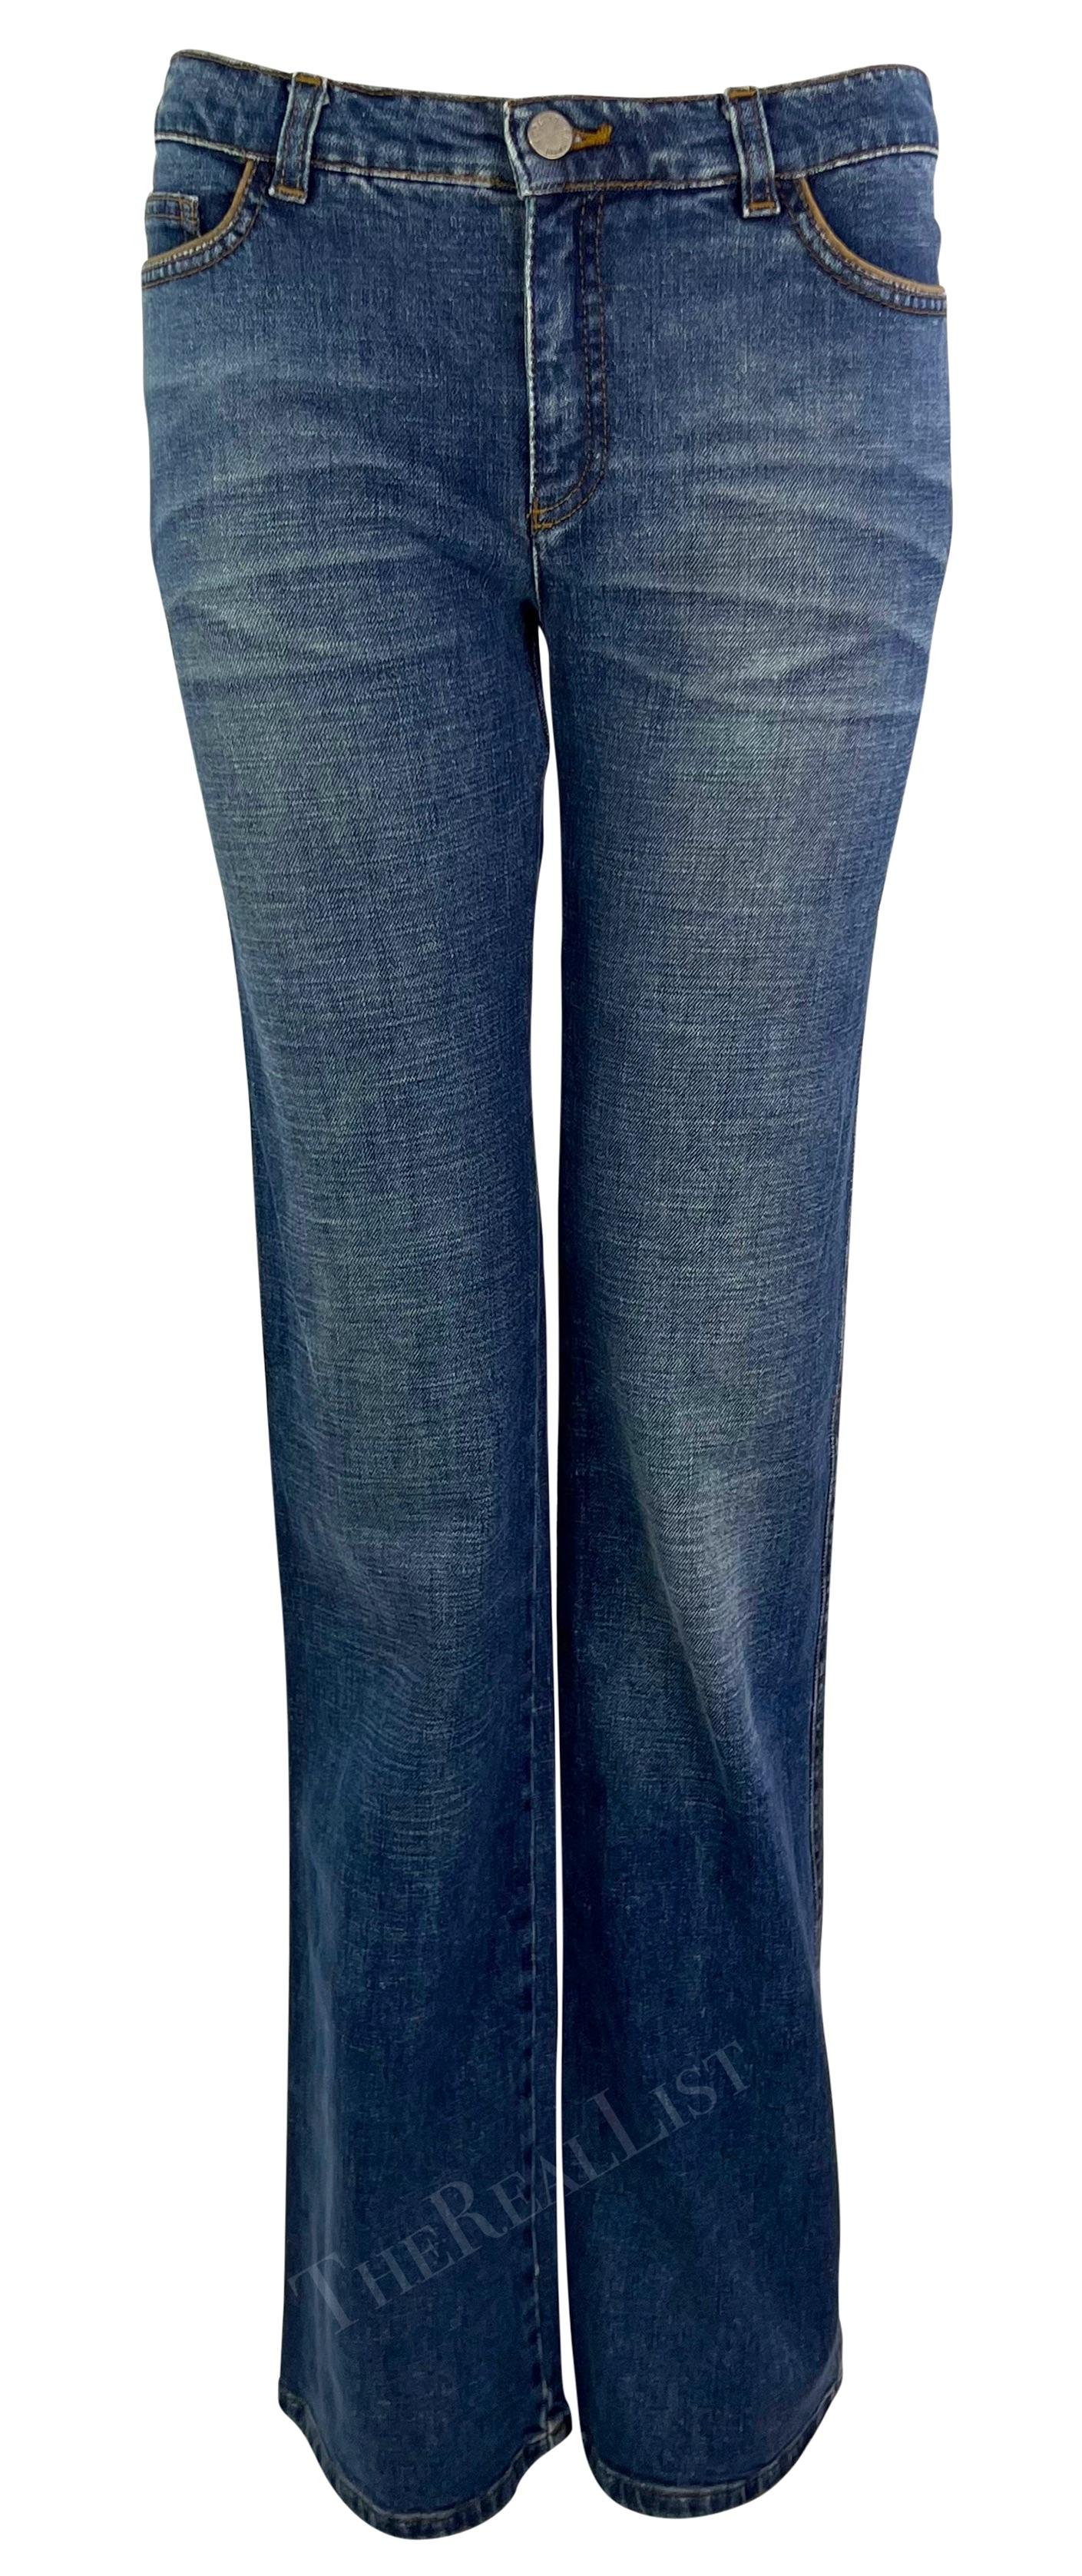 2003 Roberto Cavalli Light Wash Western-Style Leather Accent Jeans For Sale 1